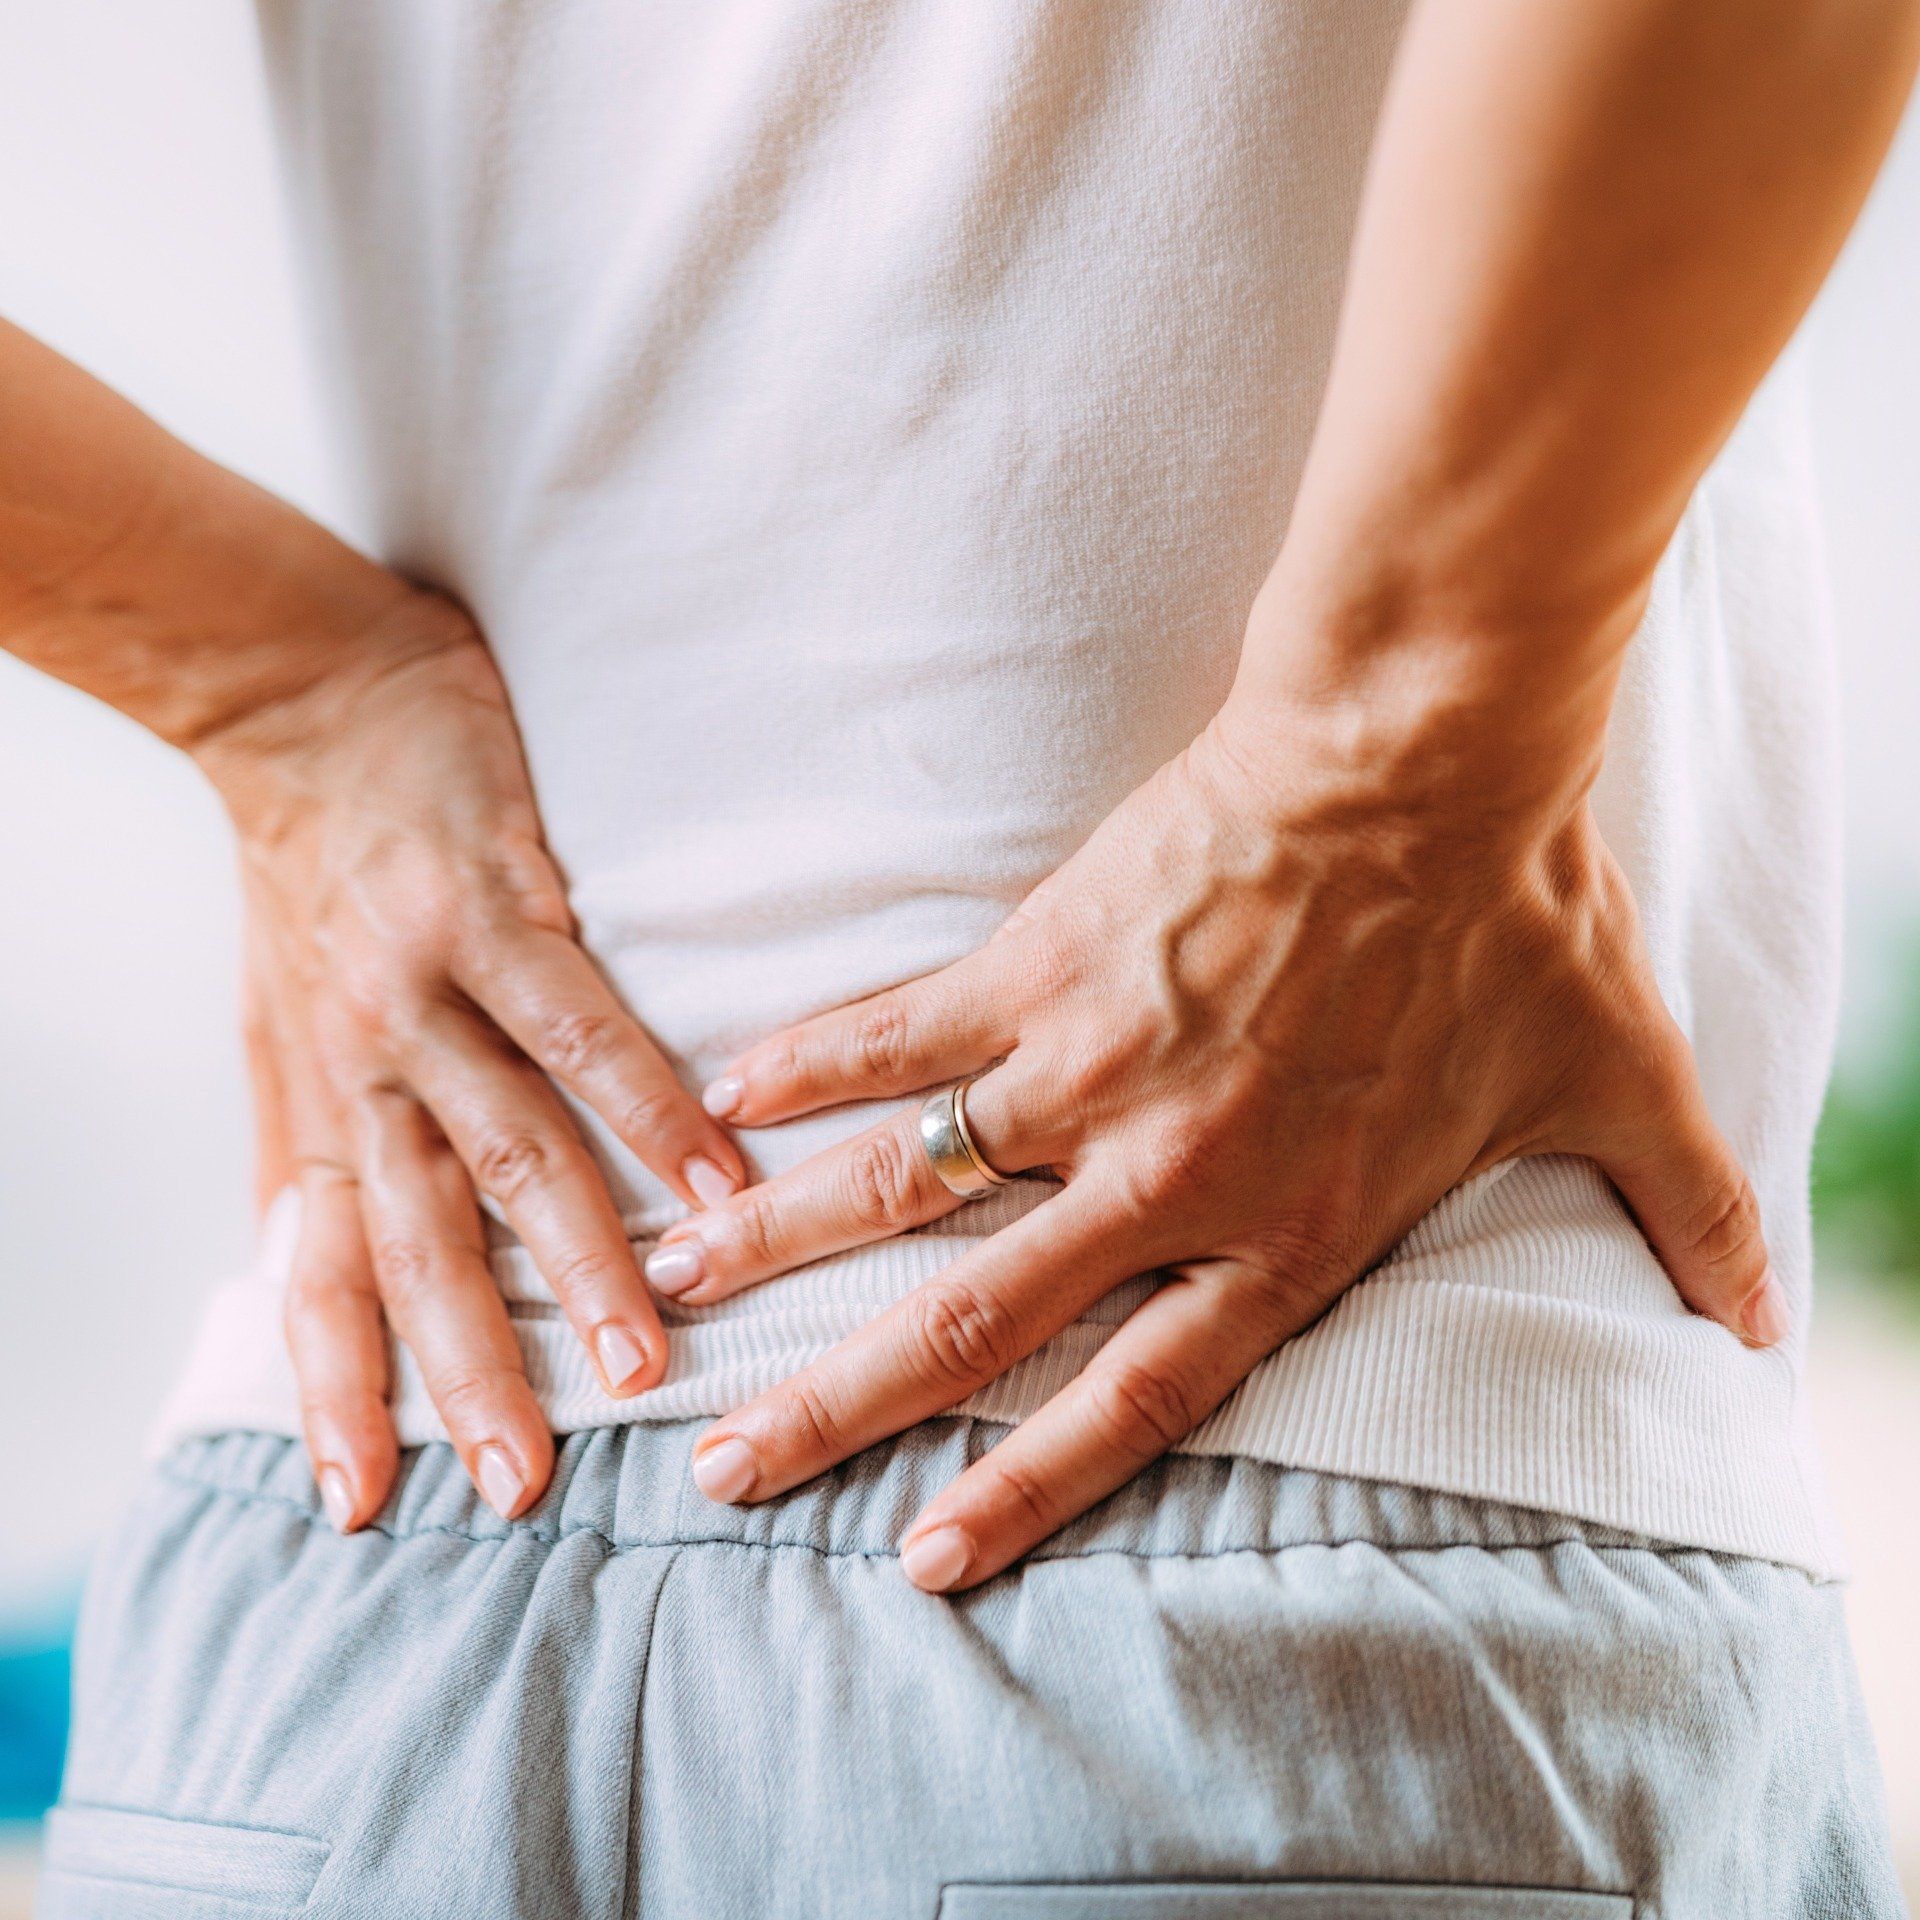 Treating Sciatica with Non-Surgical Approaches